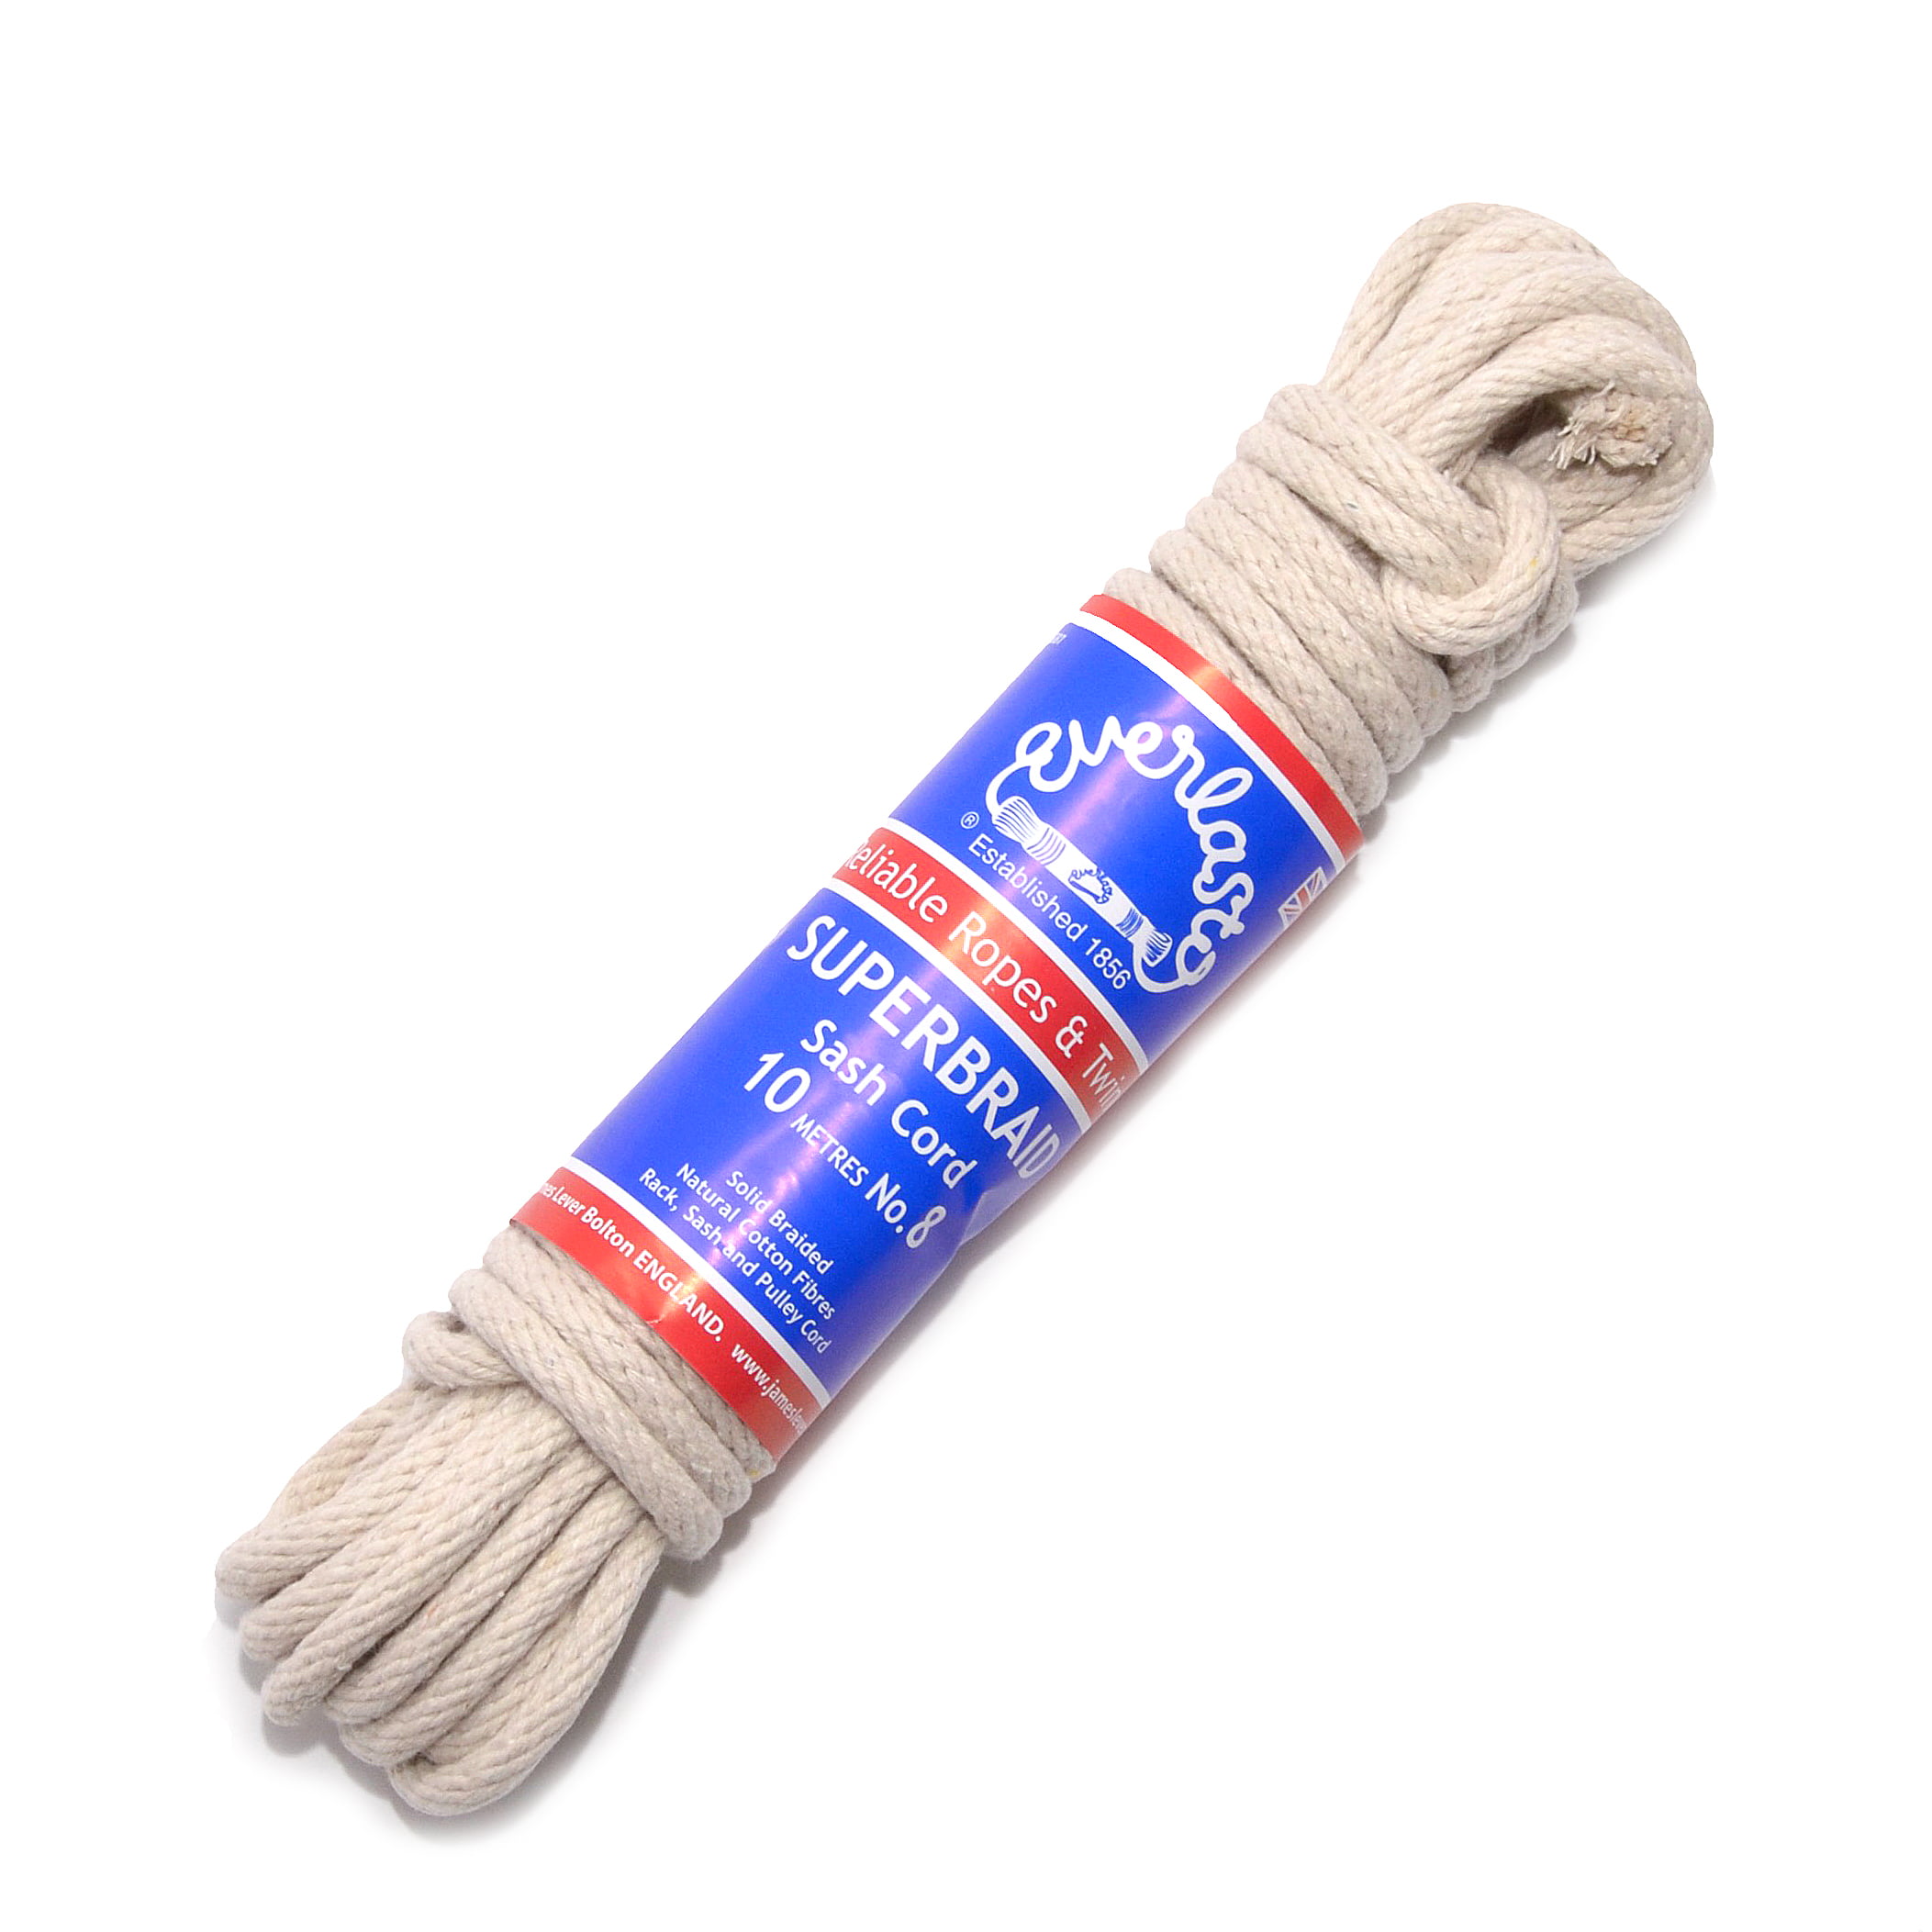 Non-Stretch, Solid and Durable 6mm rope roll 